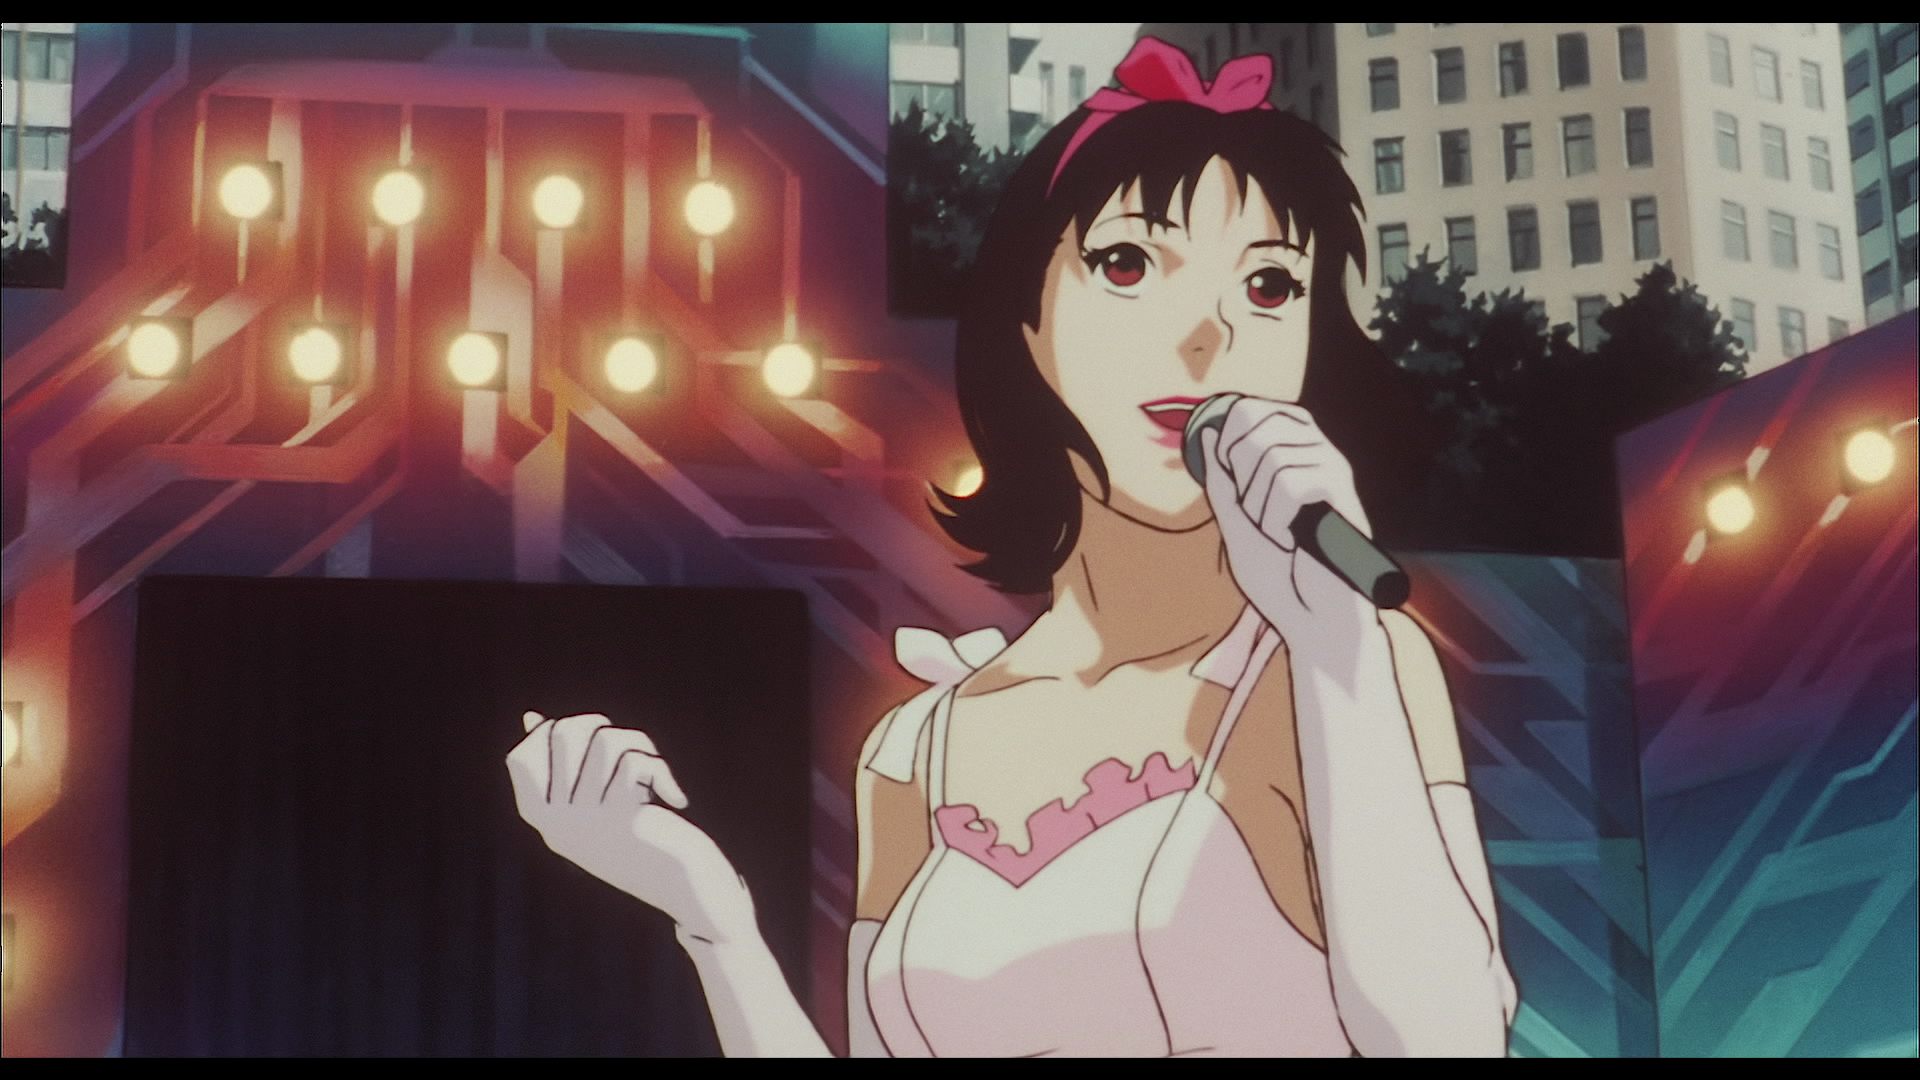 Impressions of Perfect Blue.